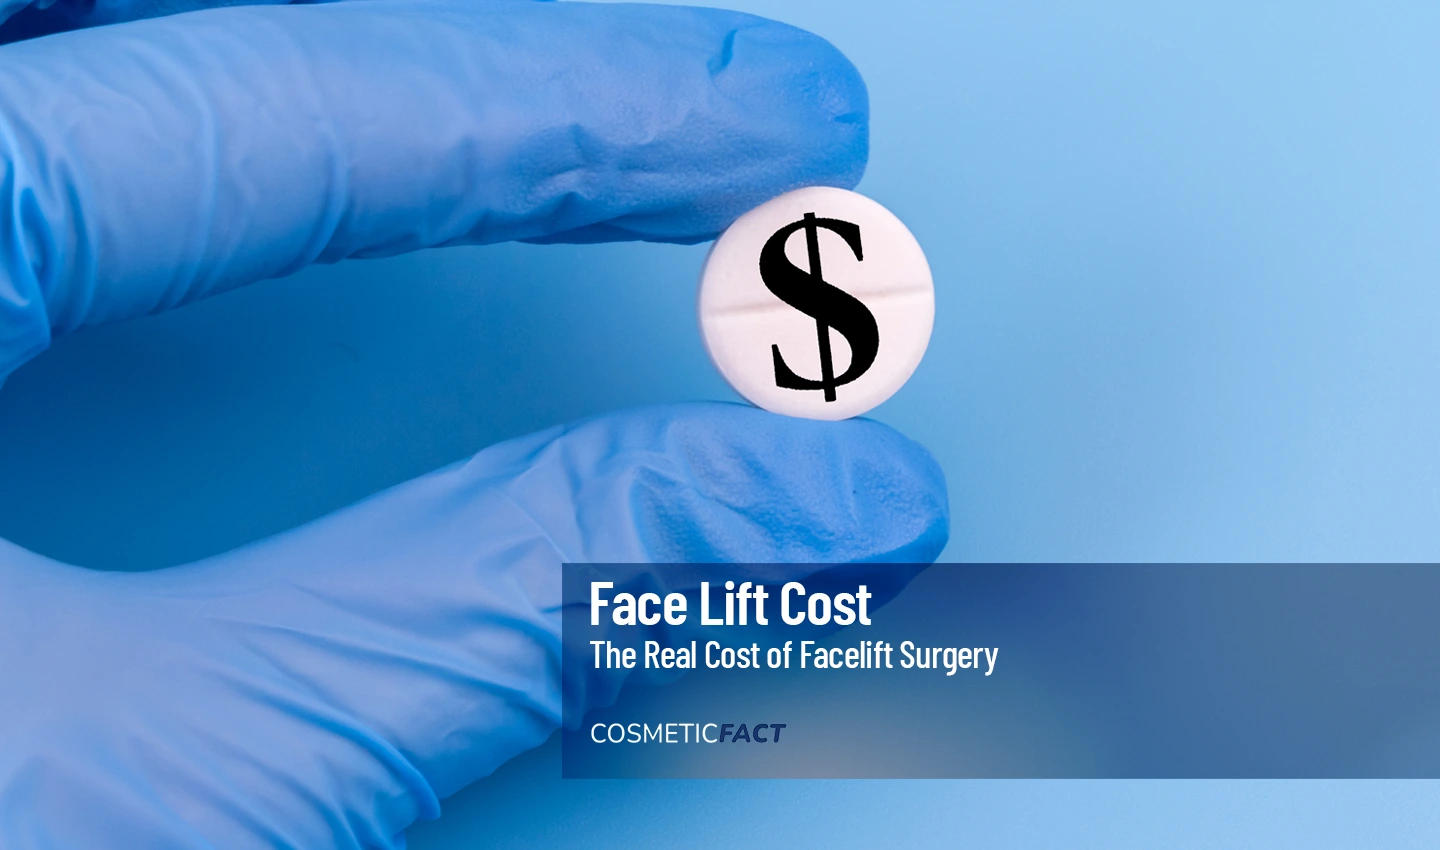 Coins, representing the facelift surgery cost and budgeting.